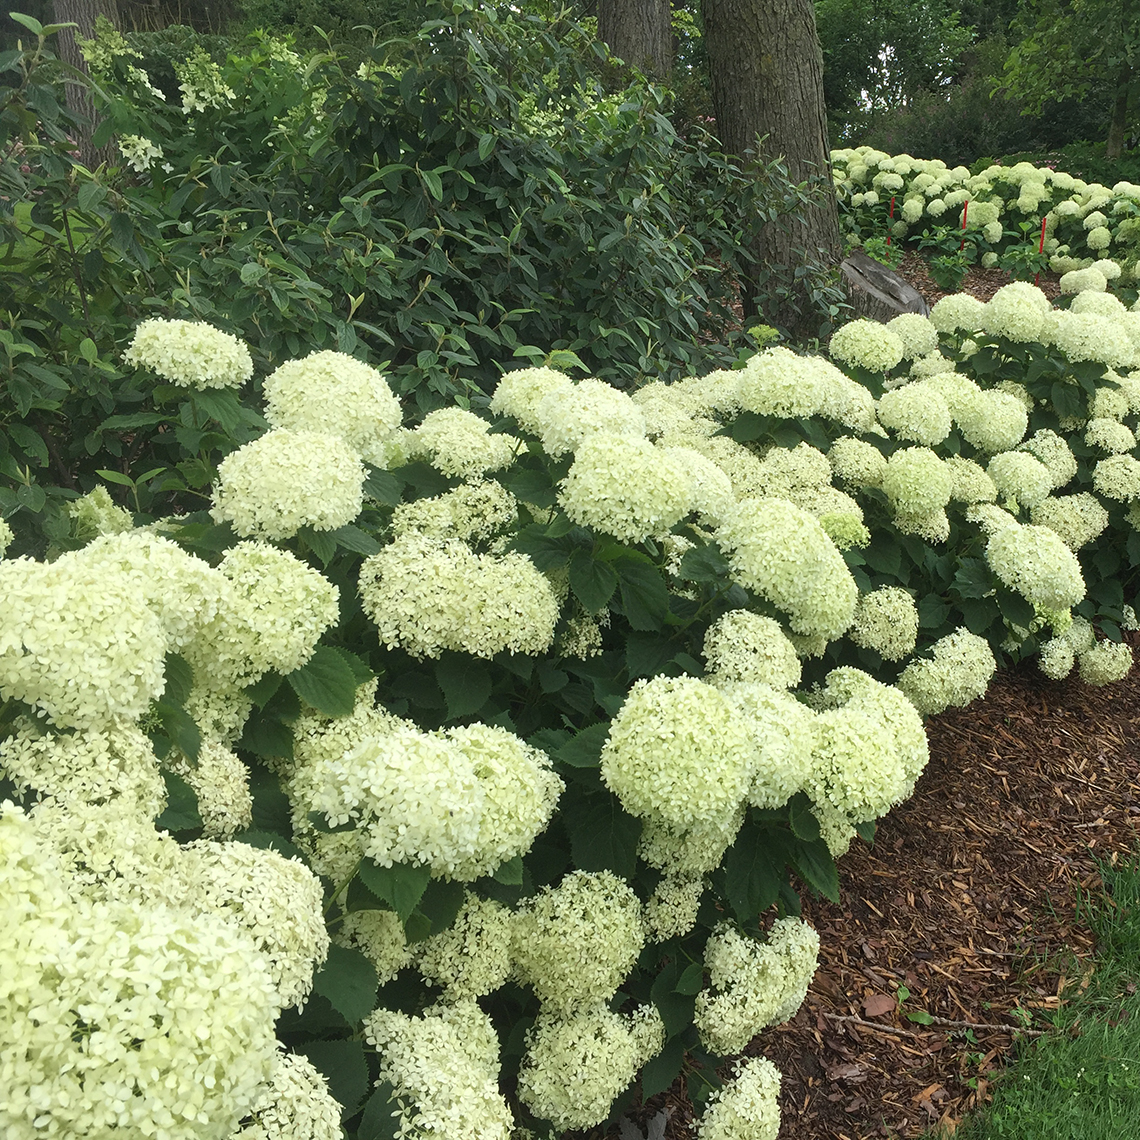 A bed planted with several Invincibelle Limetta hydrangeas all of which are in bloom